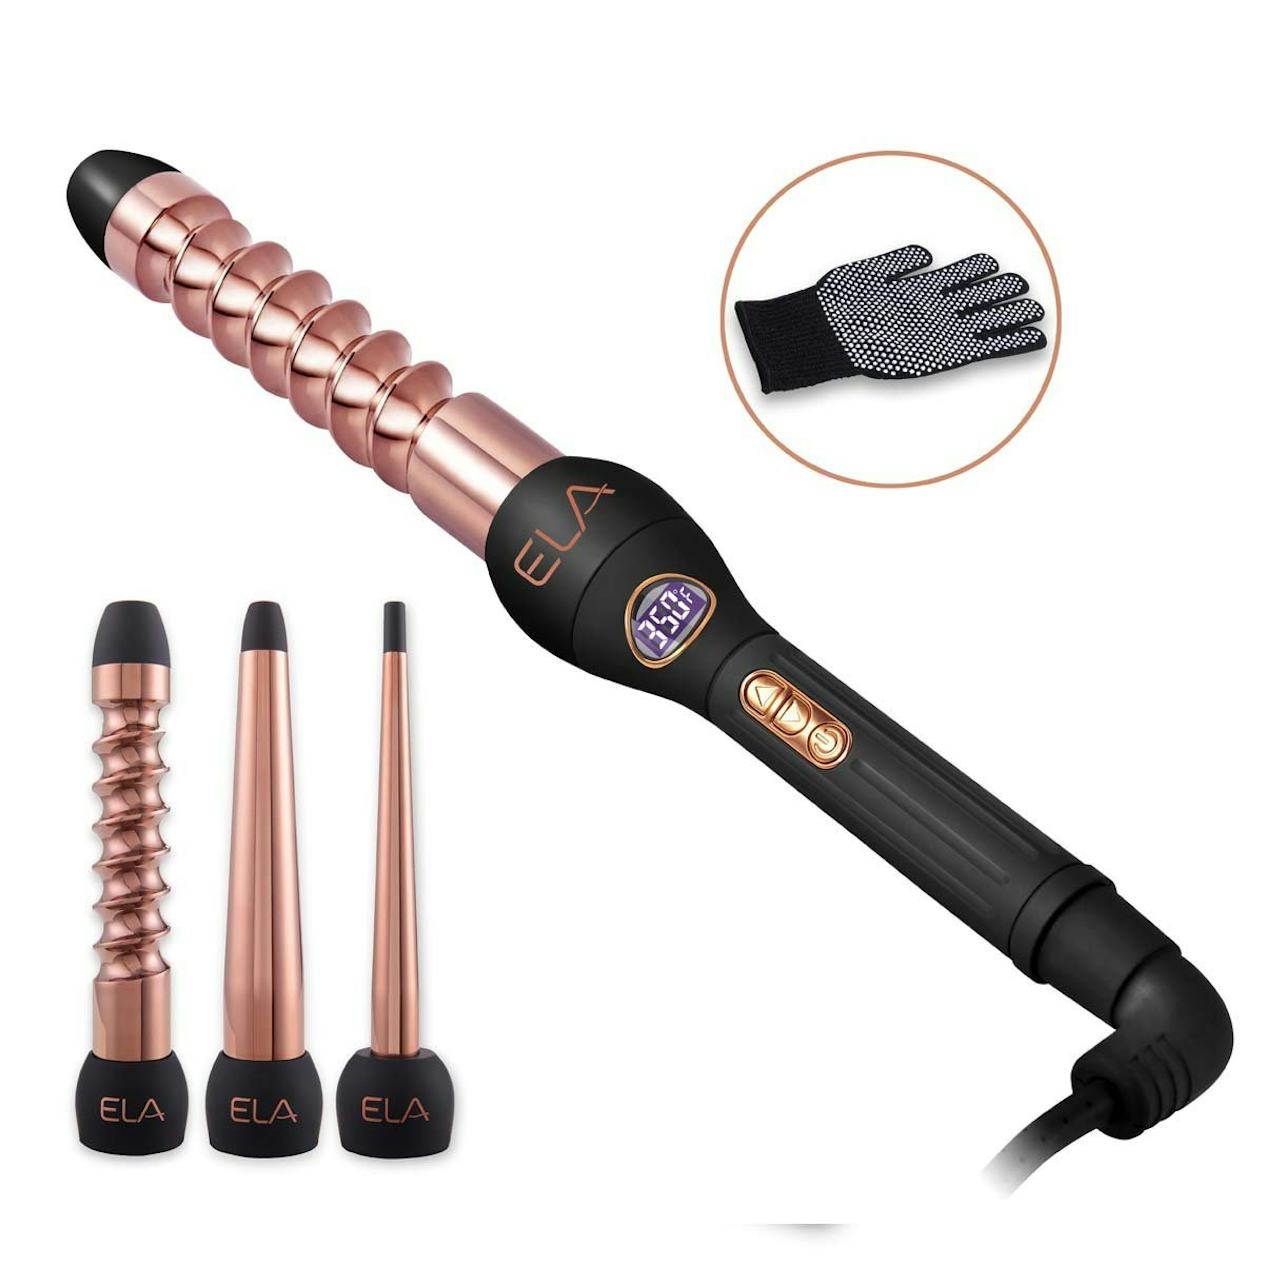 The 7 Best Spiral Curling Irons